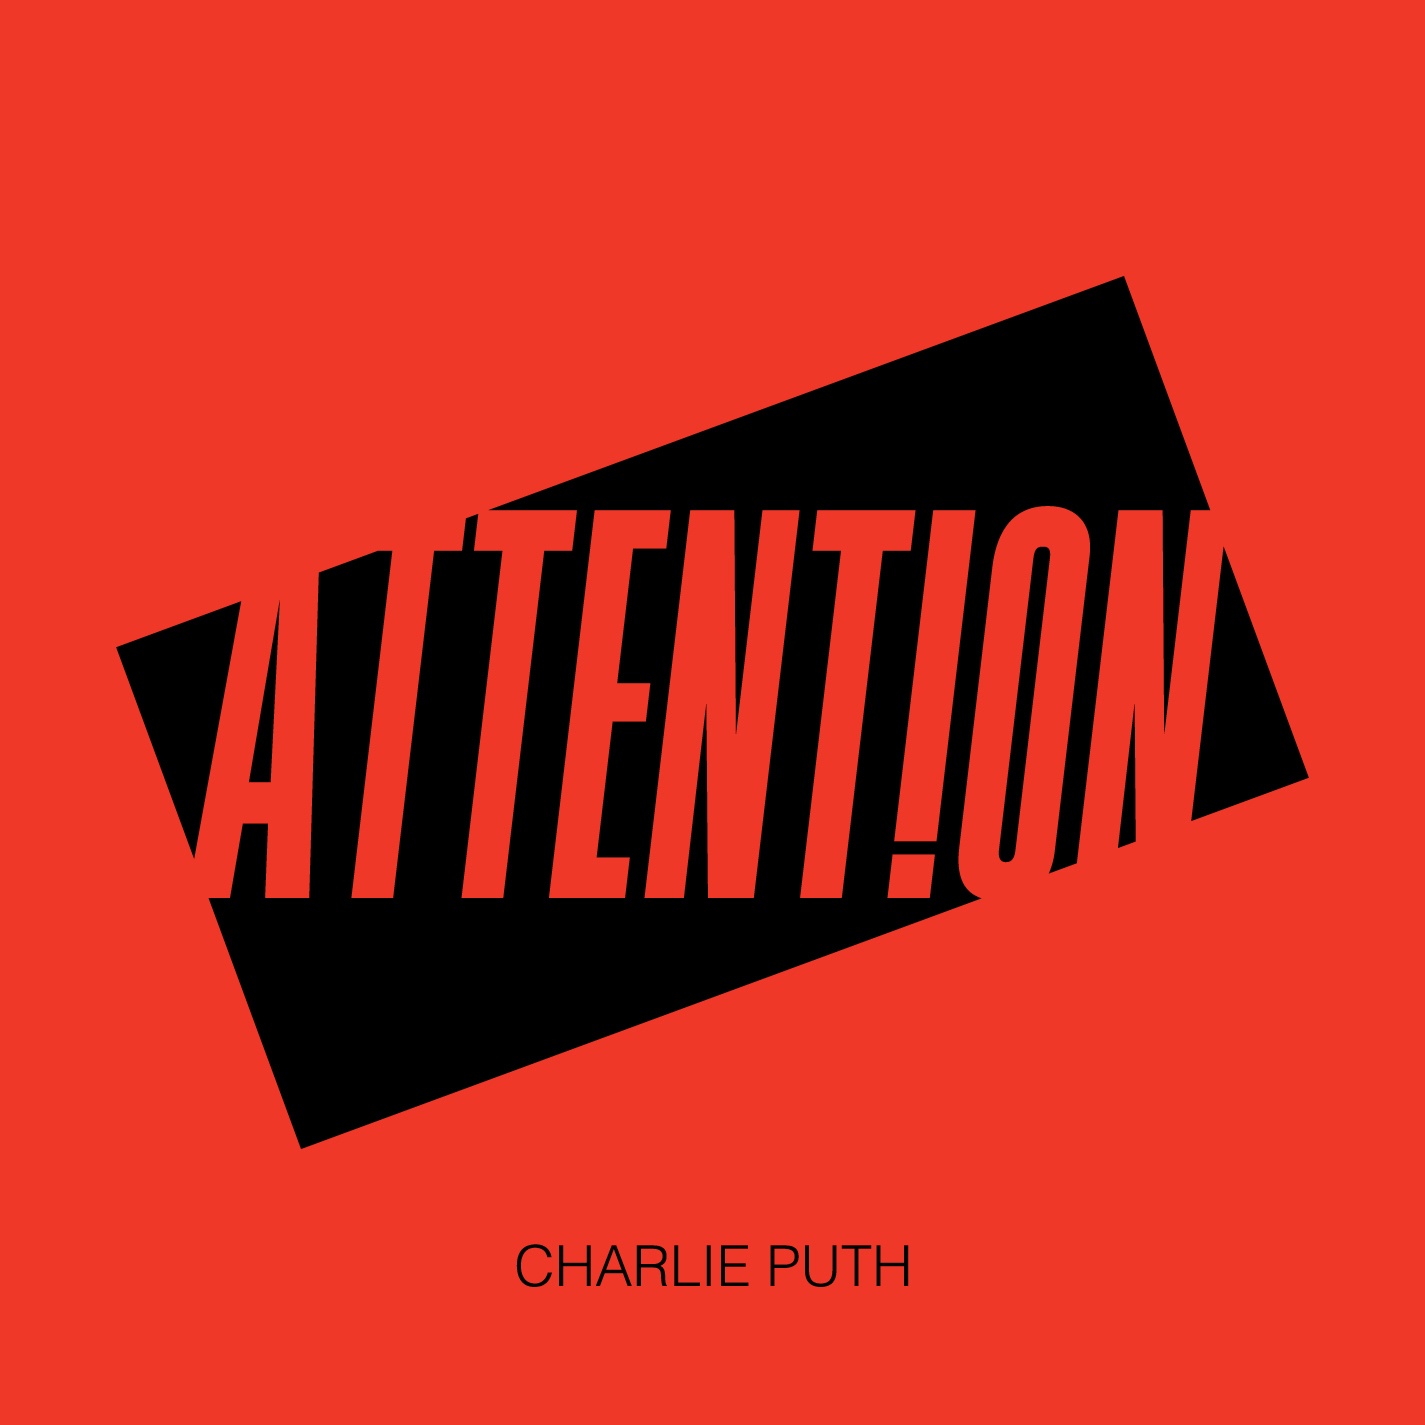 Charlie Puth Logo - Attention (Charlie Puth song)